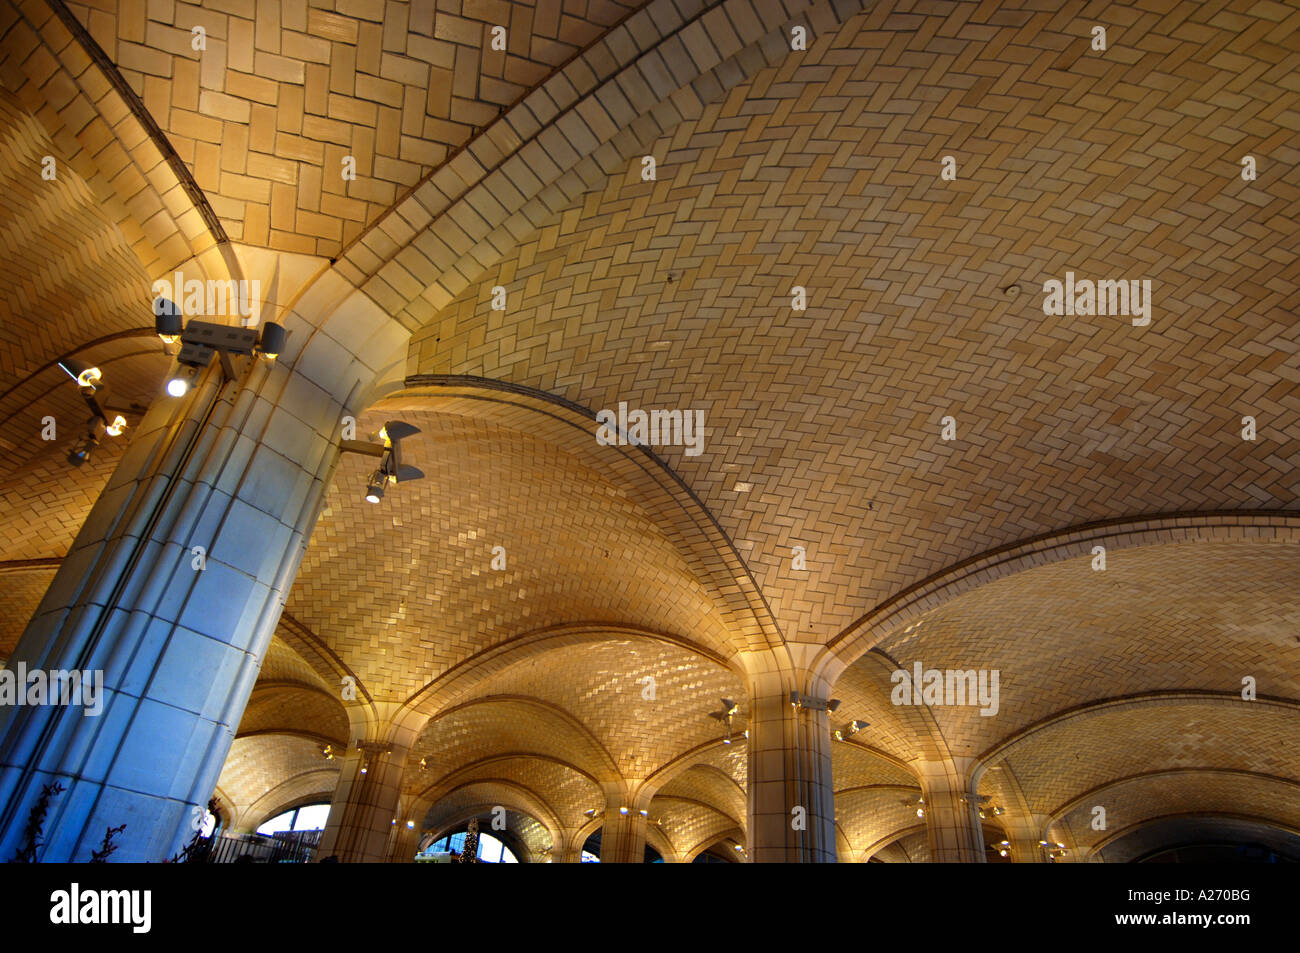 Guastovini tiles on the vaulted roof of a supermarket under the Queensbro Bridge New York Stock Photo